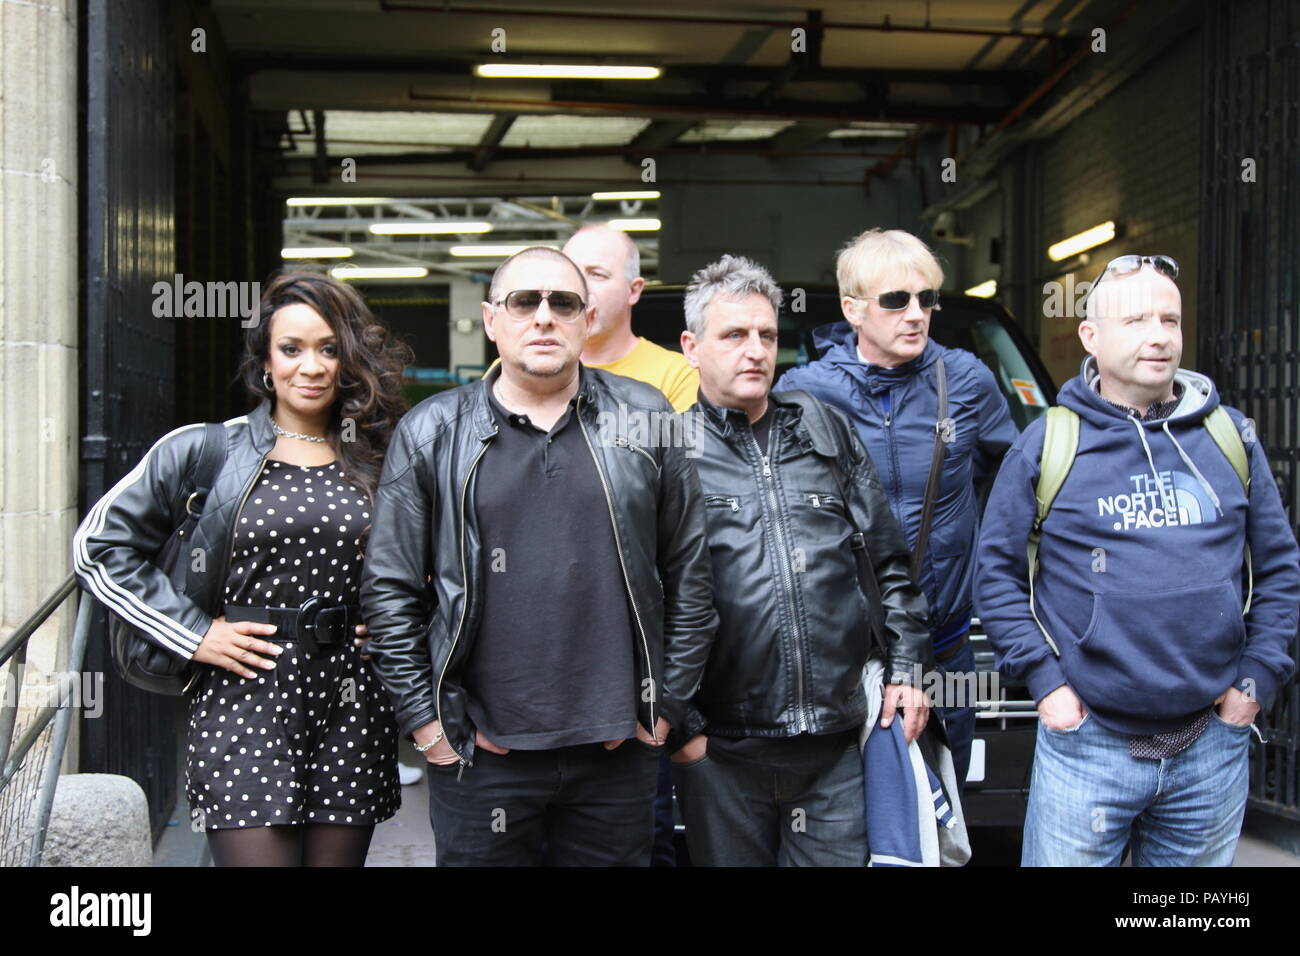 Happy Mondays alternative Rock band posed for this photograph outside the ITV London studios. Thank you Happy Mondays. Stock Photo